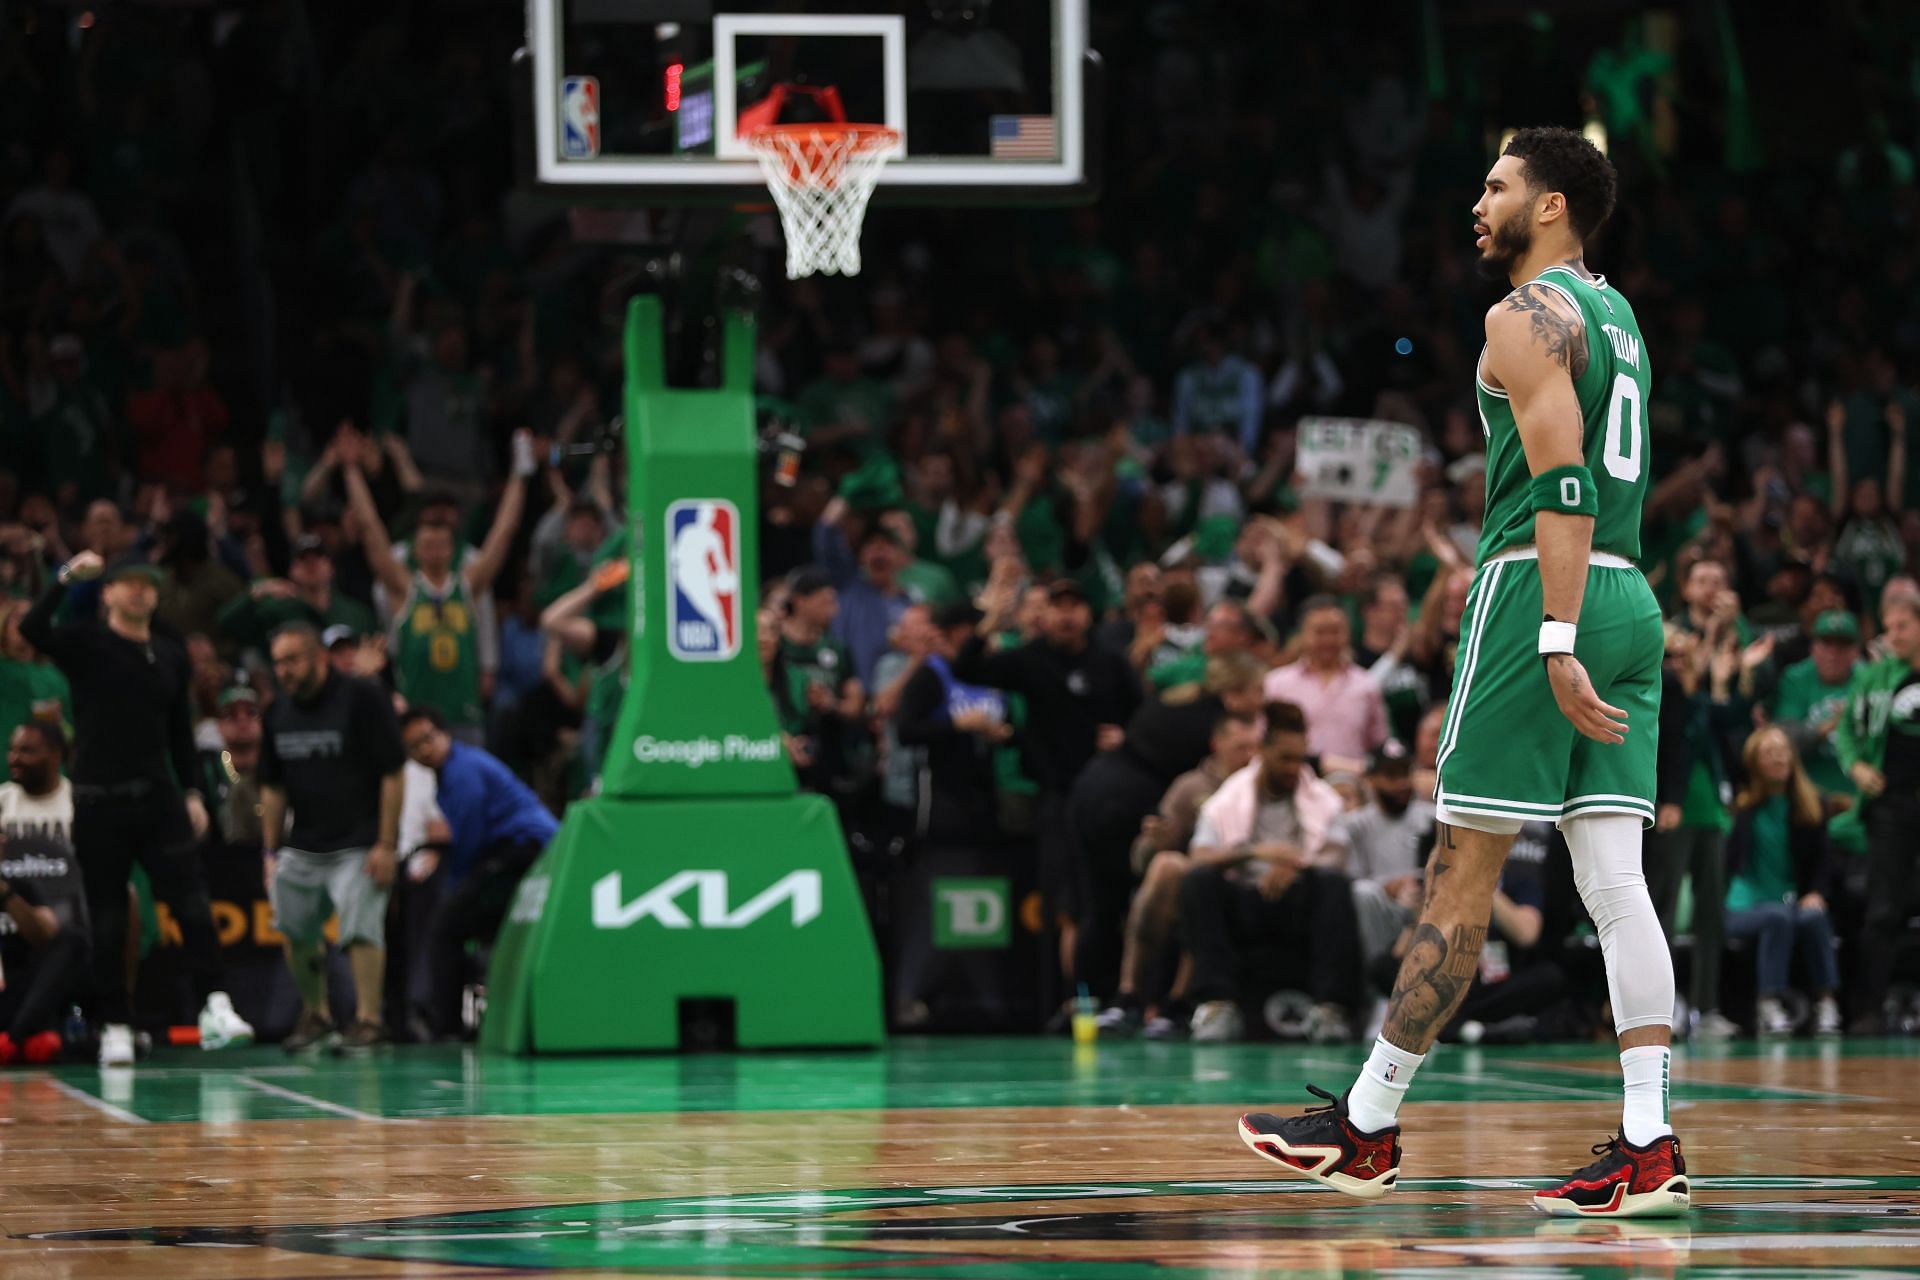 Tatum scored 51 points to blow the 76ers out (Image via Getty Images)